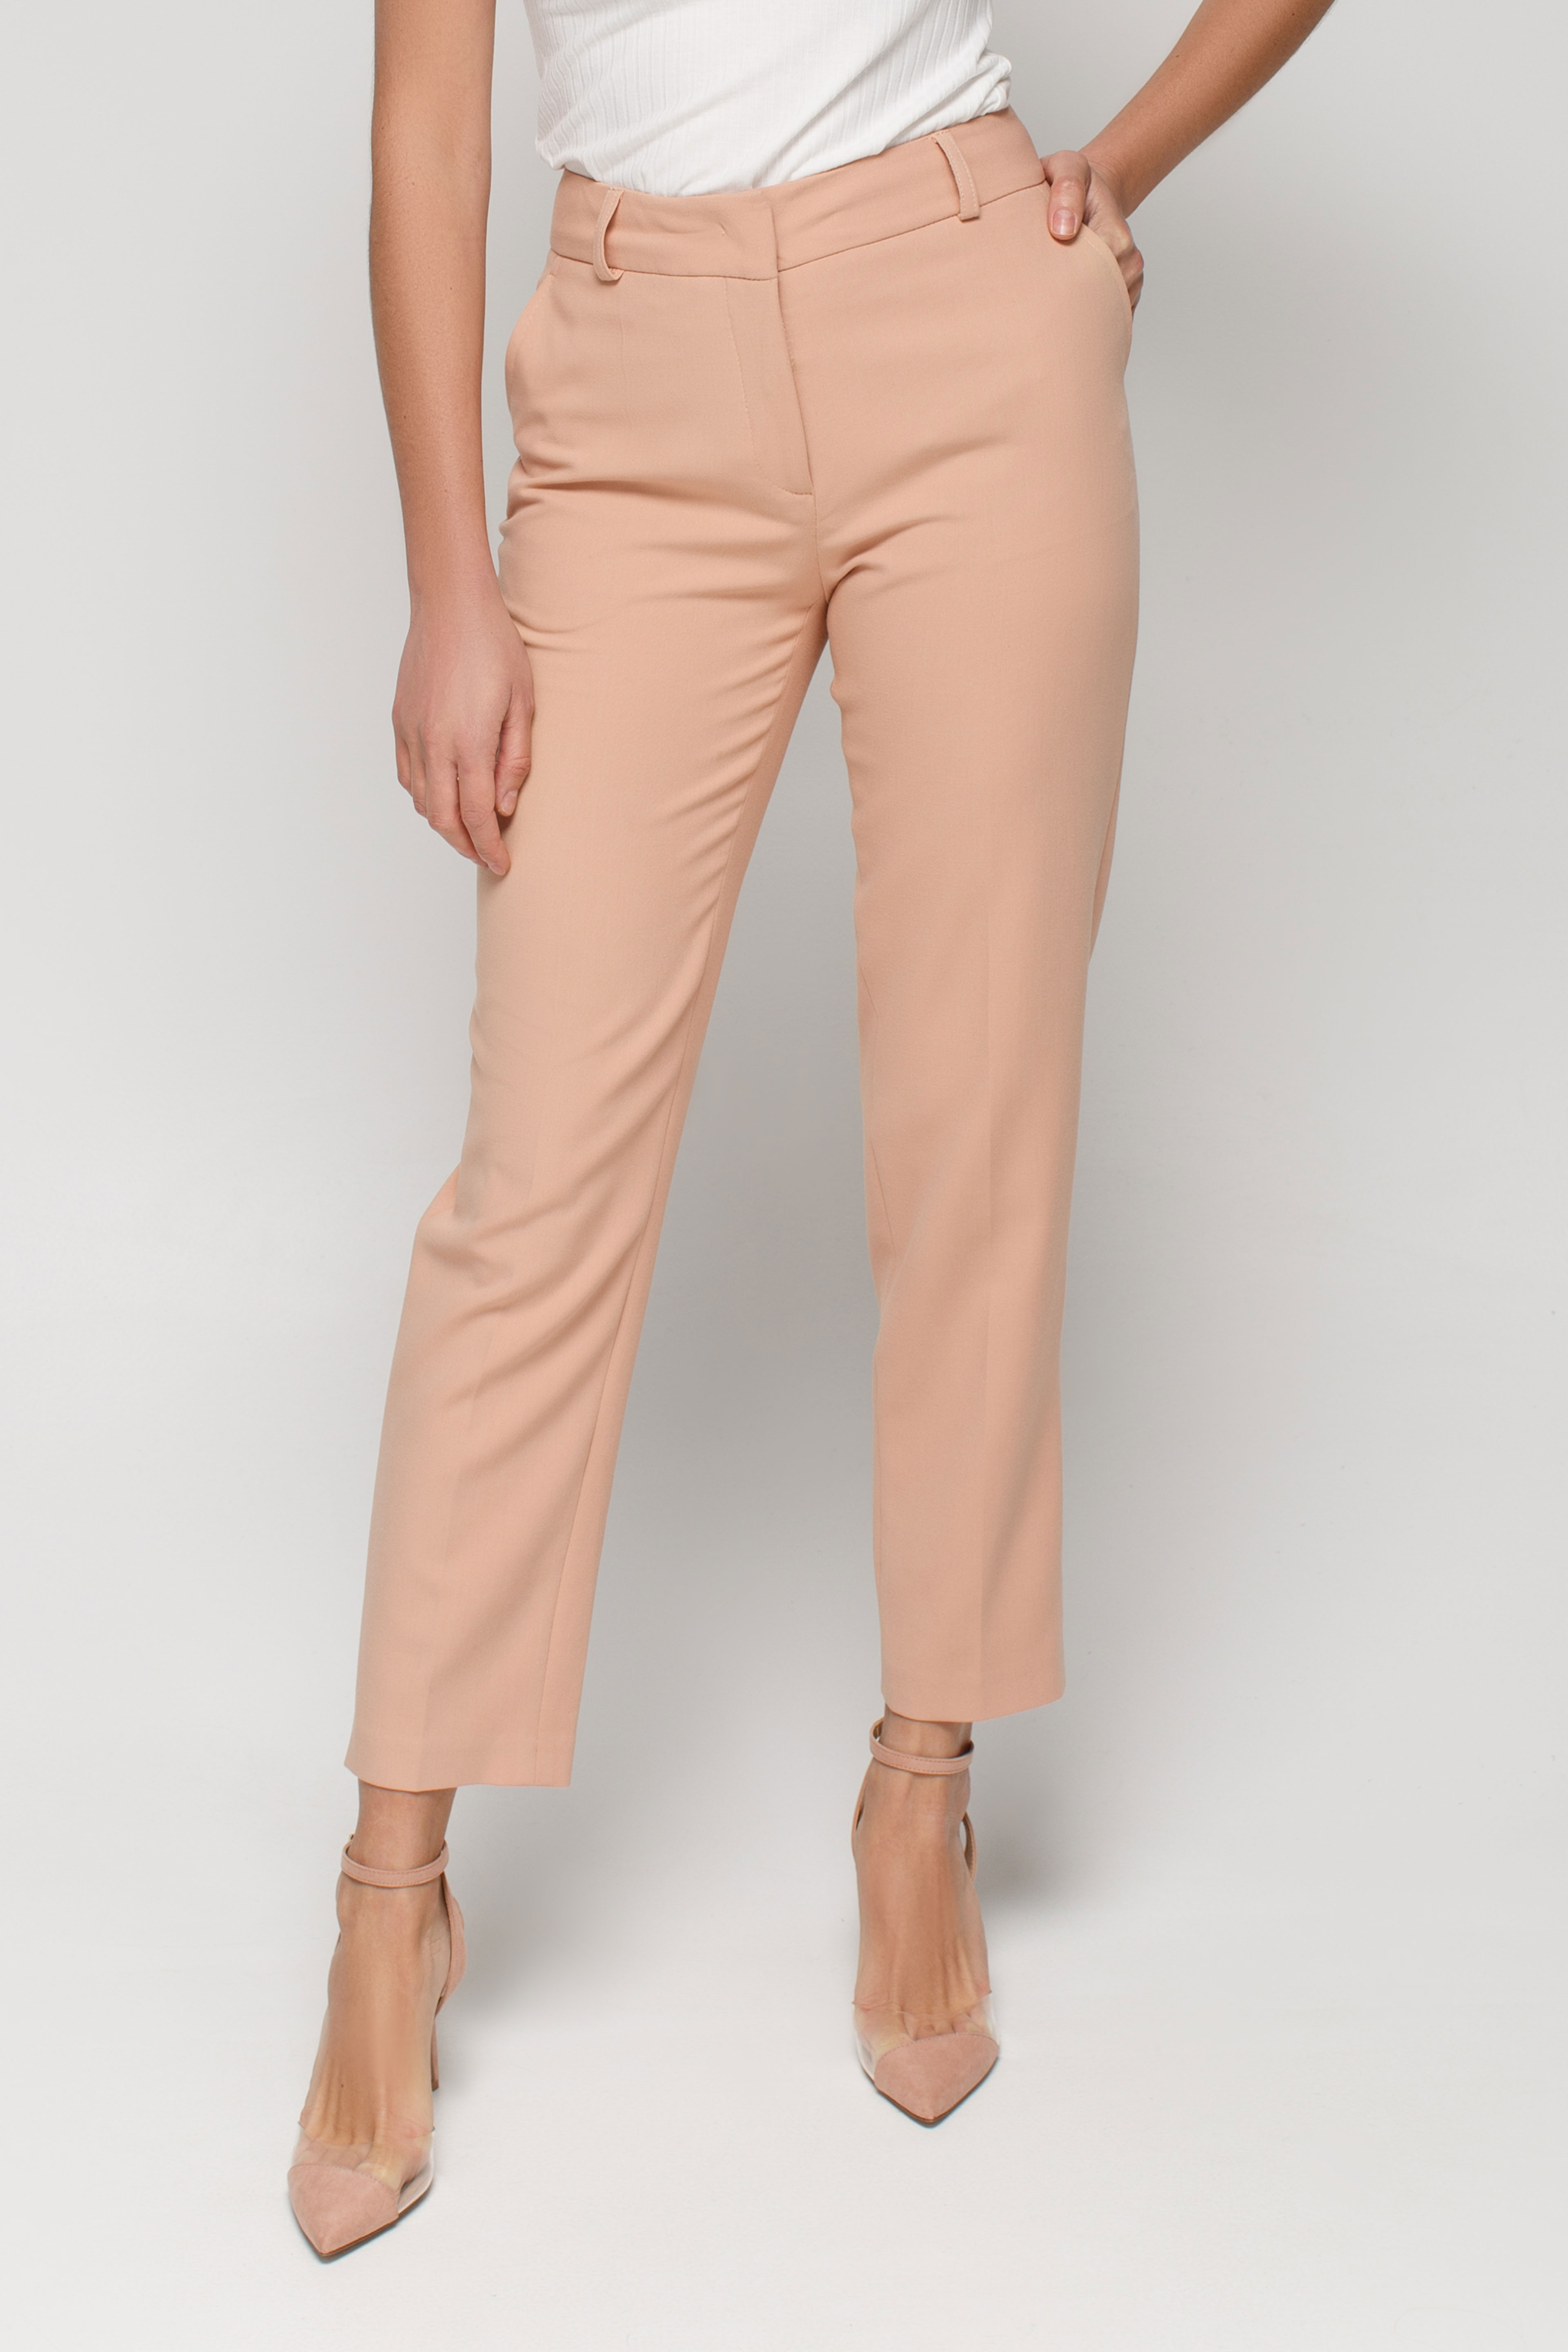 Beige trousers tapered to the bottom, photo 2